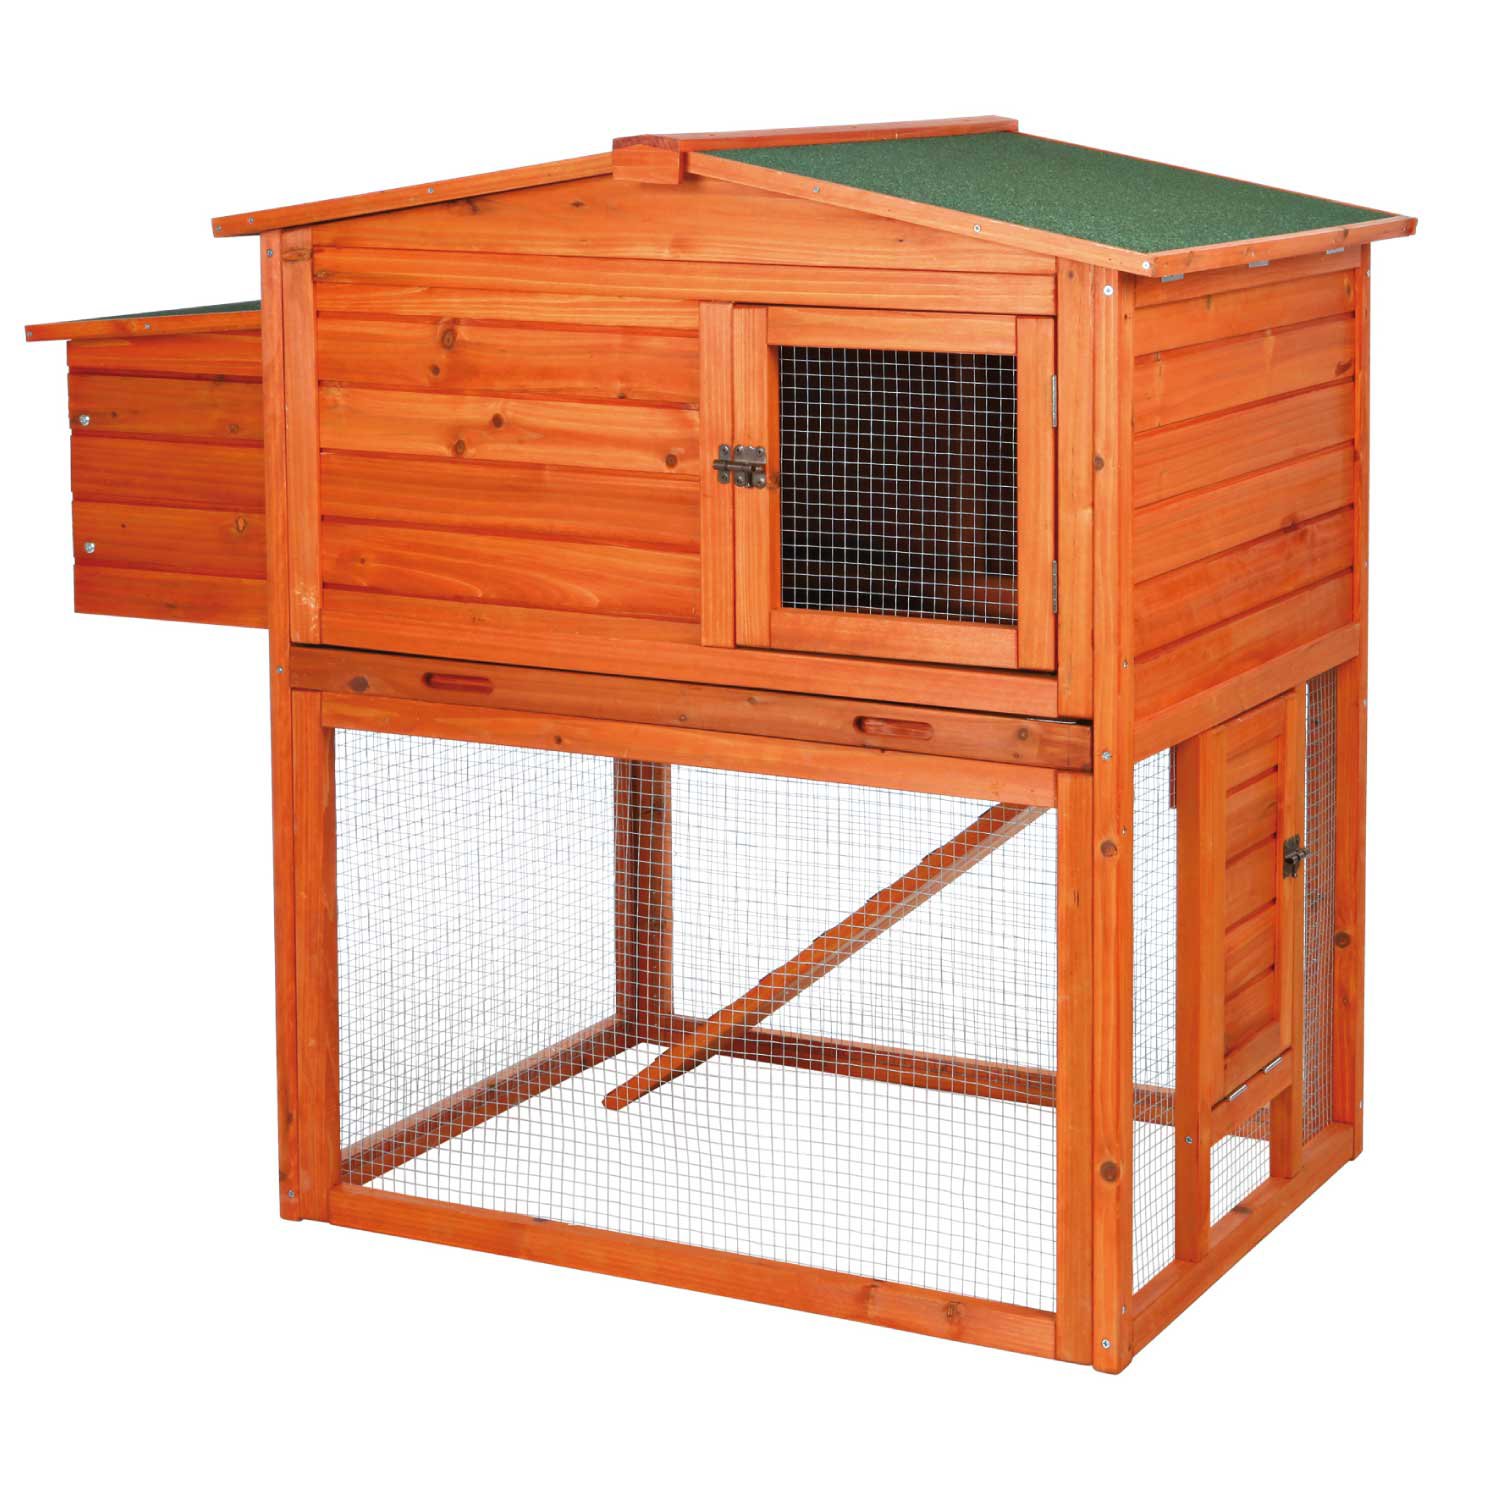 ... Chicken Coop with Outdoor Run, 41" L X 31" W X 42" H | Petco Store